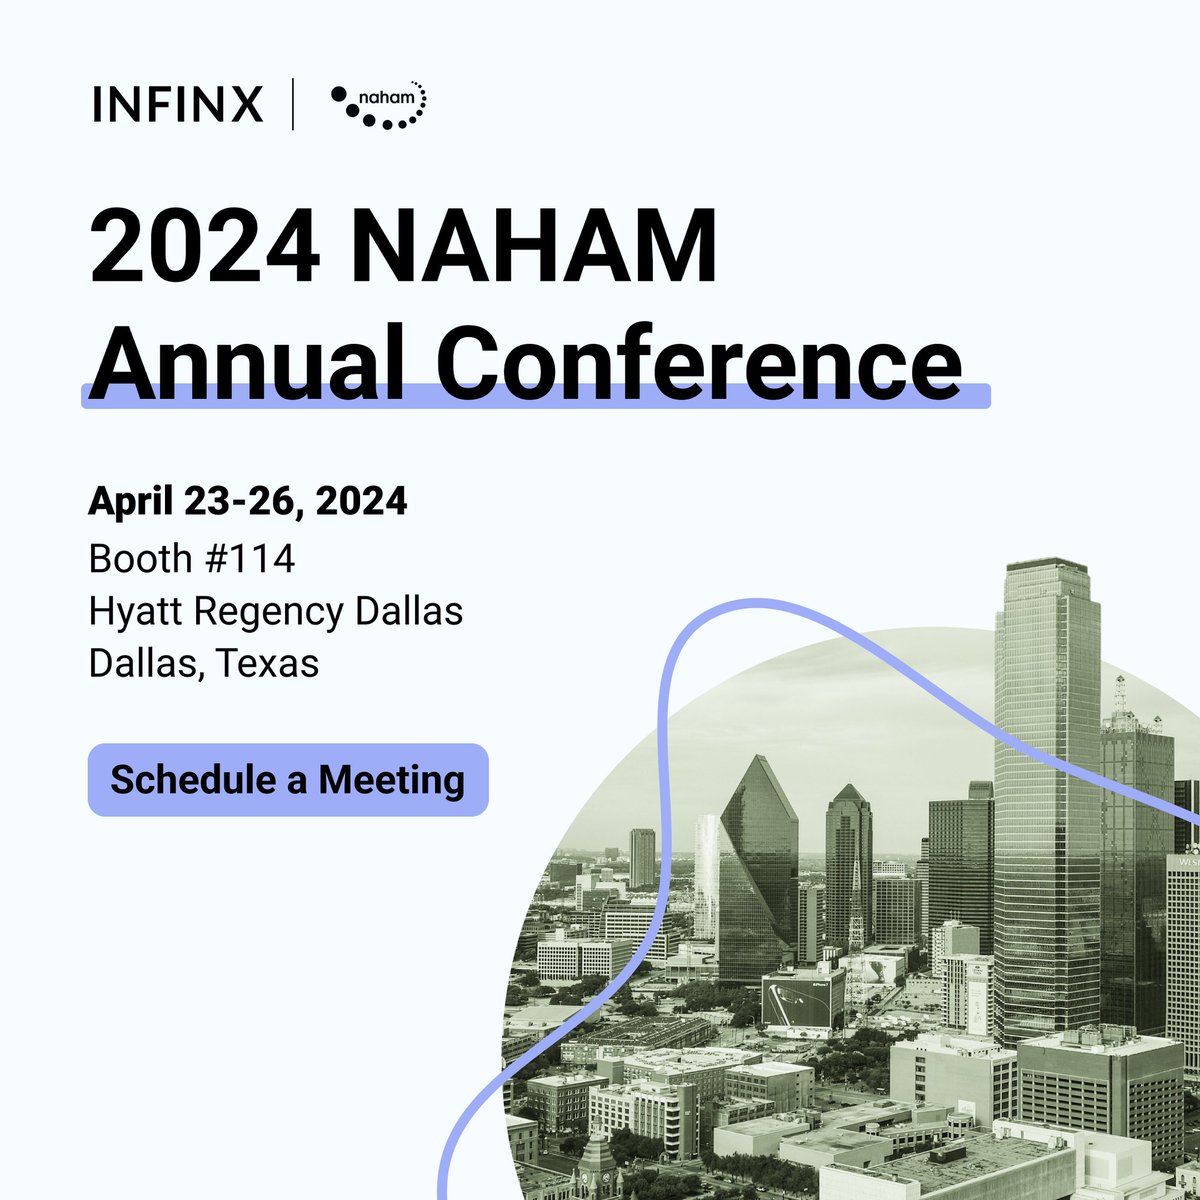 David Byrd and Nathan Skorick will be in booth #114 at the NAHAM 2024 offering a comprehensive assessment of prior authorization gaps, revenue shortfall detections, and more. hubs.li/Q02s7WZn0 #PriorAuthorization #RCMAutomation #PatientAccess #PatientPay #NAHAM24 #RCM